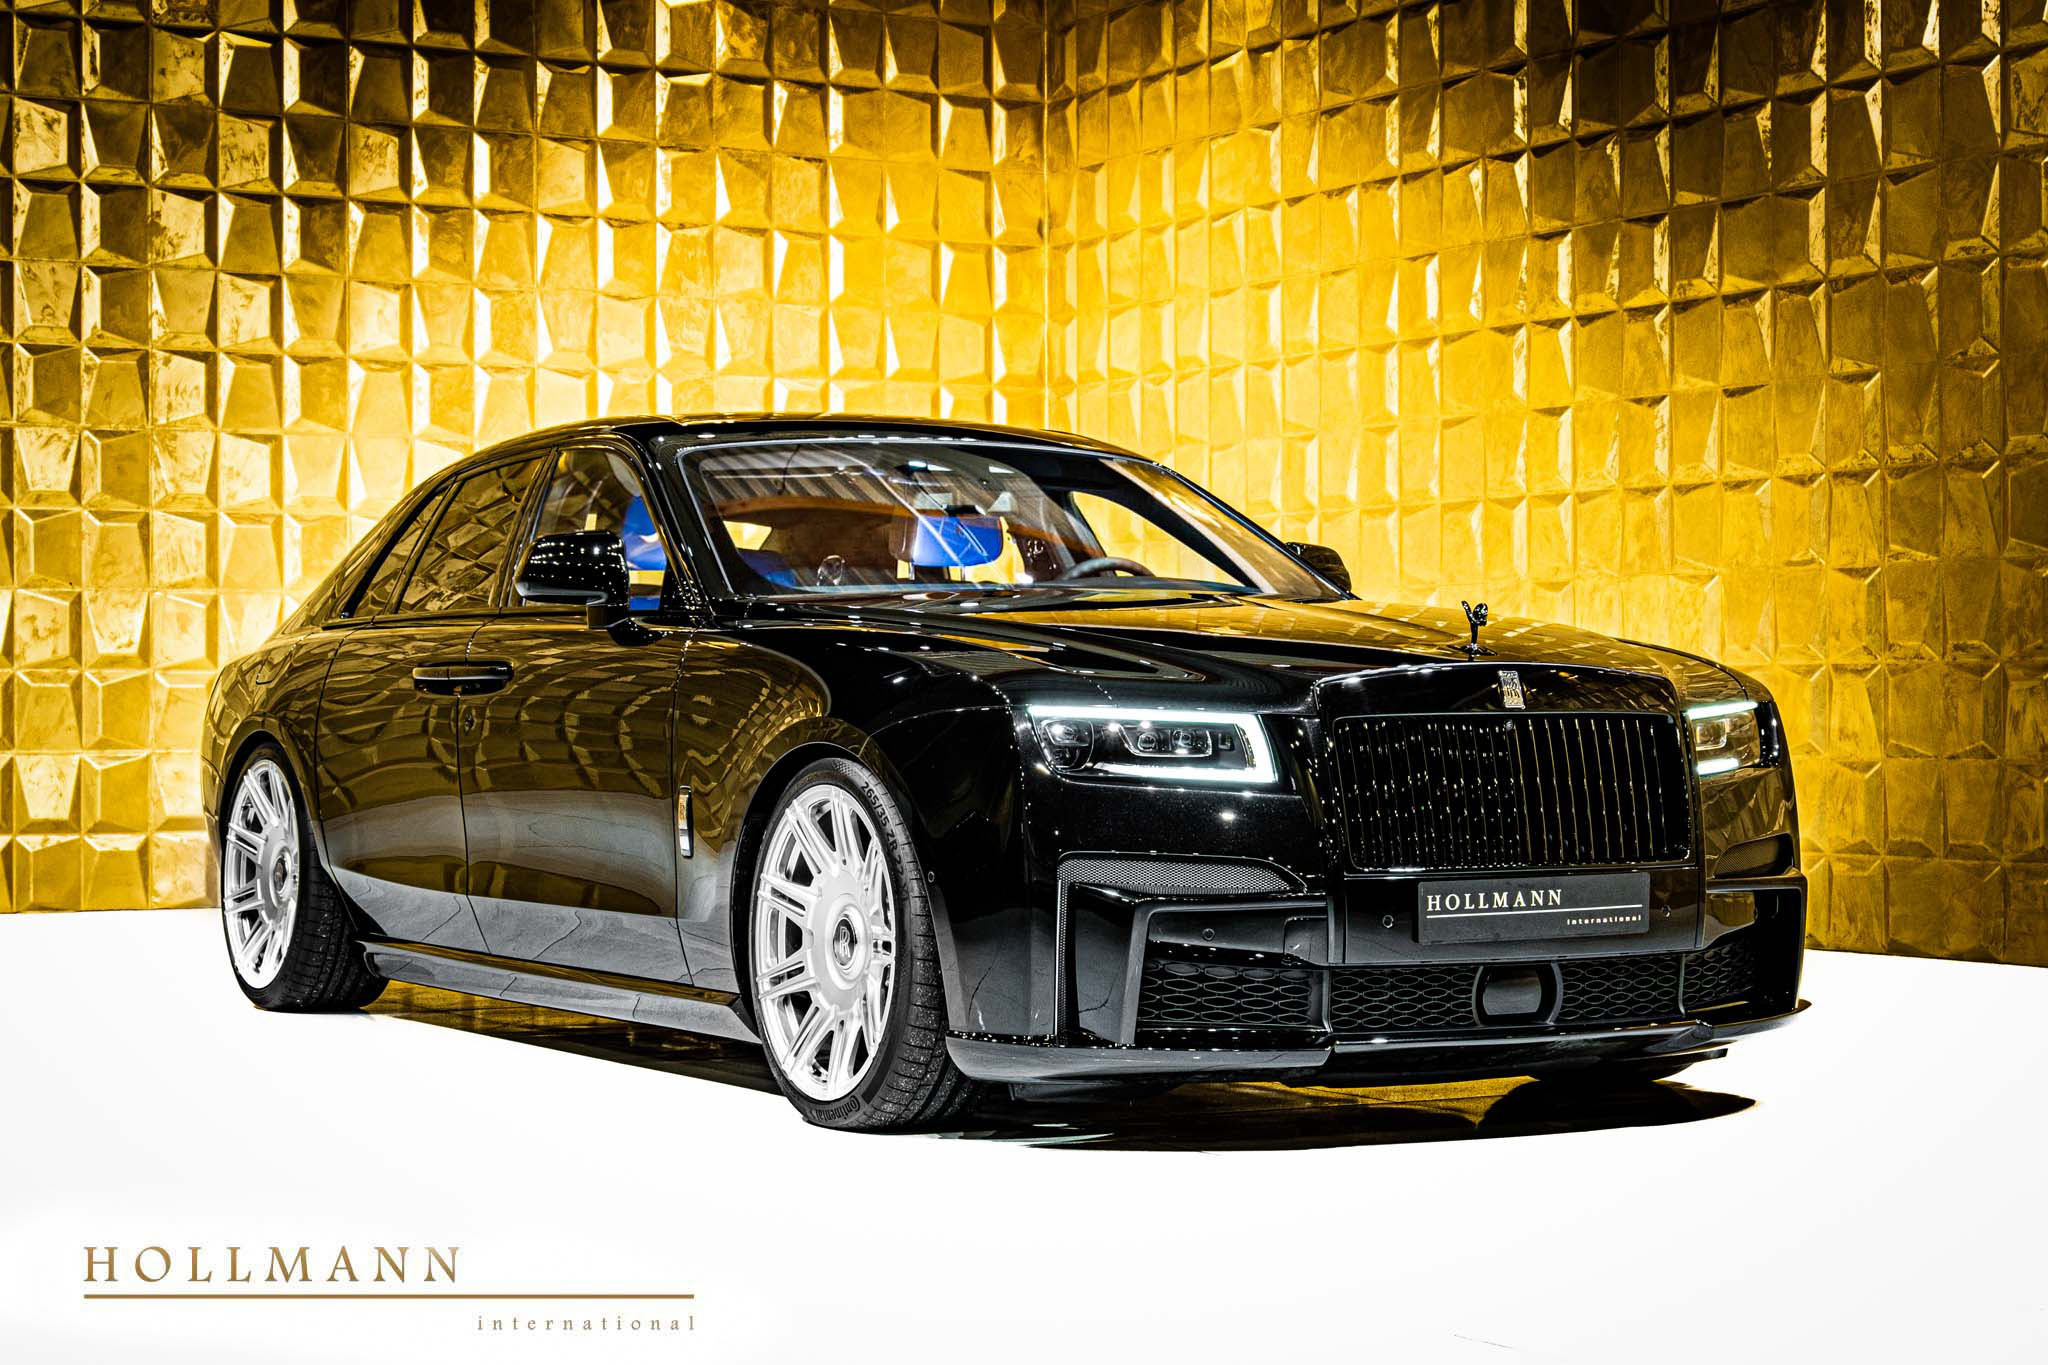 Gold Chrome and Black, Versace Rolls-Royce Looks Like a True